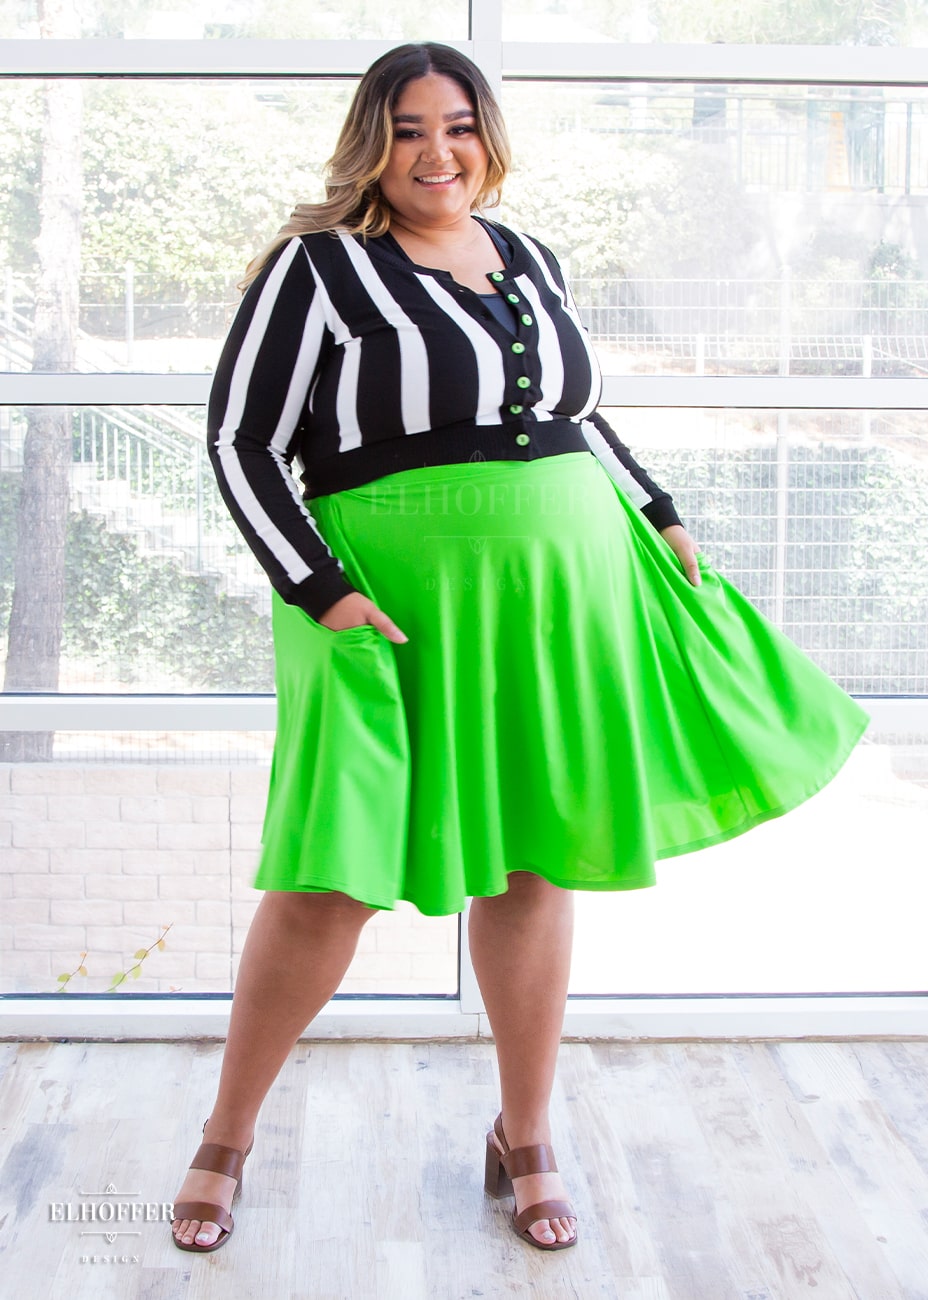 Cori, a medium skinned size 2XL model with brunette and blonde ombre hair, wears a high-waisted knee length full skirt with a fitted matching waistband encased with elastic in showtime green, a bright almost neon green. She swishes the skirt to show the movement of the fabric. She has paired it with our showtime striped cardigan.